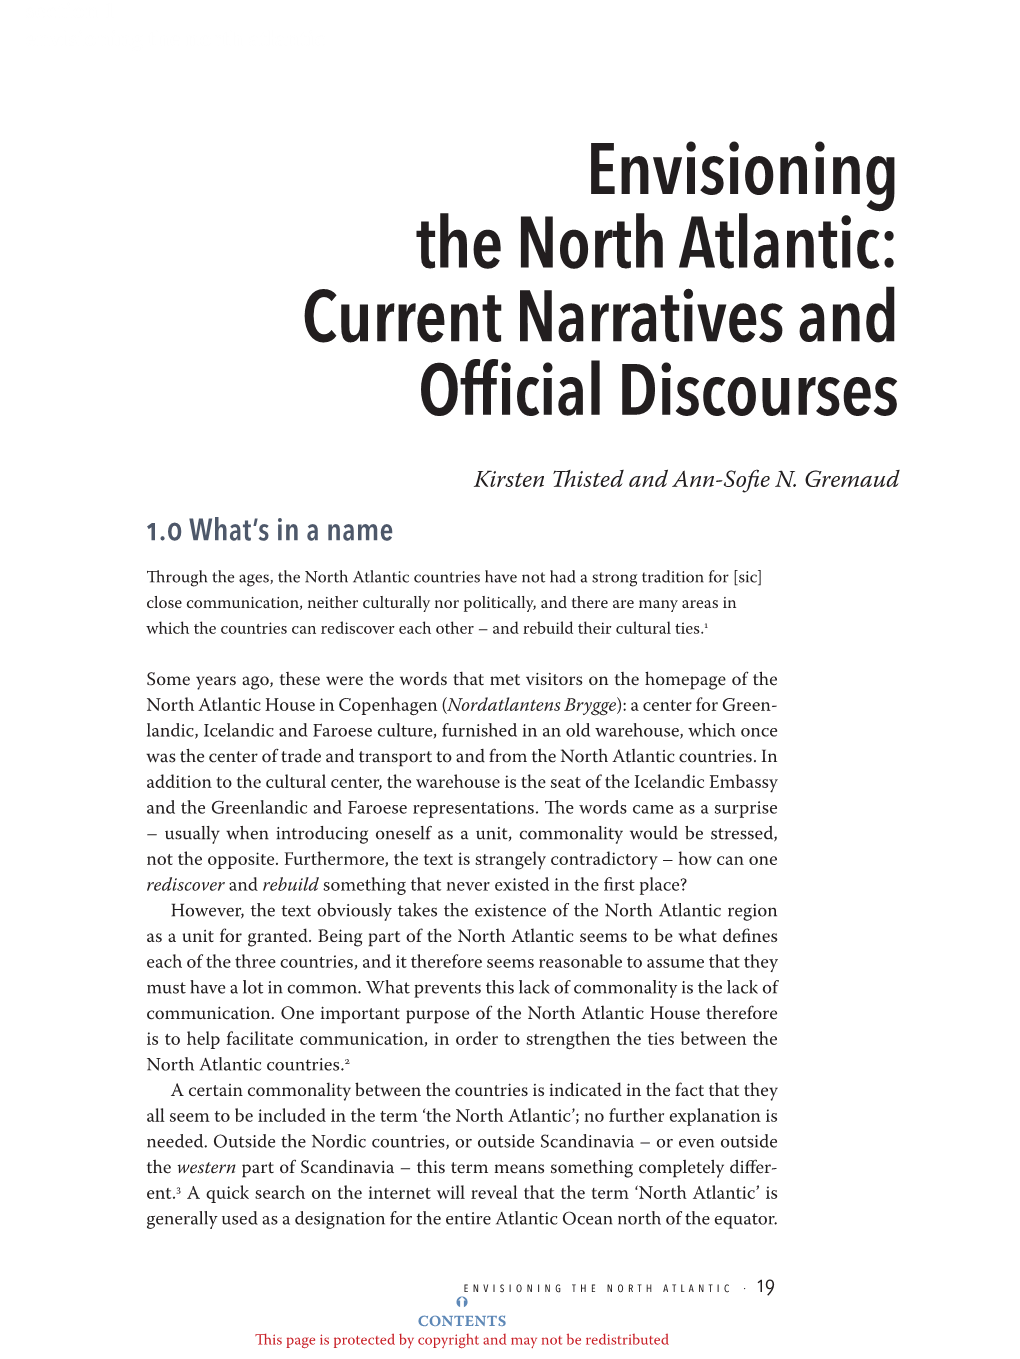 Envisioning the North Atlantic: Current Narratives and Official Discourses